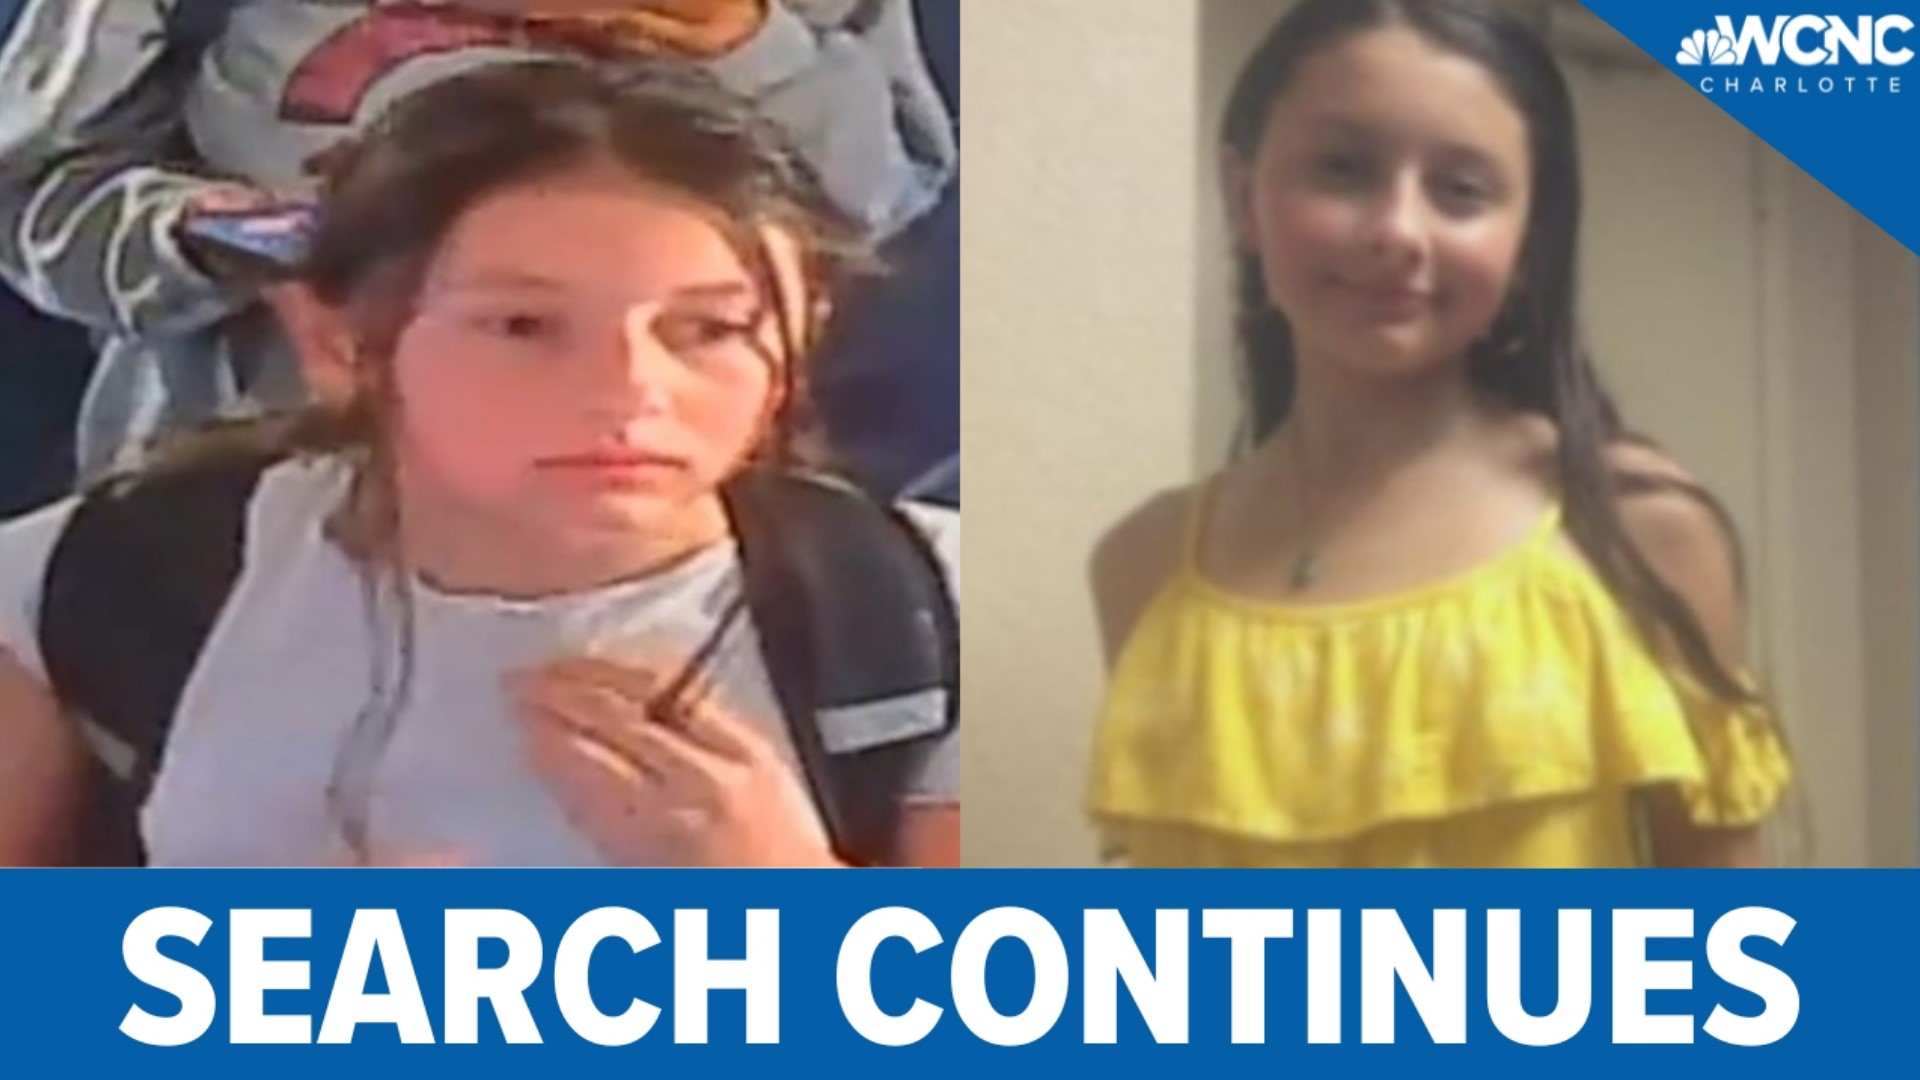 We're getting a look at the last time the FBI says 11-year-old Madalina Cojocari was seen alive.